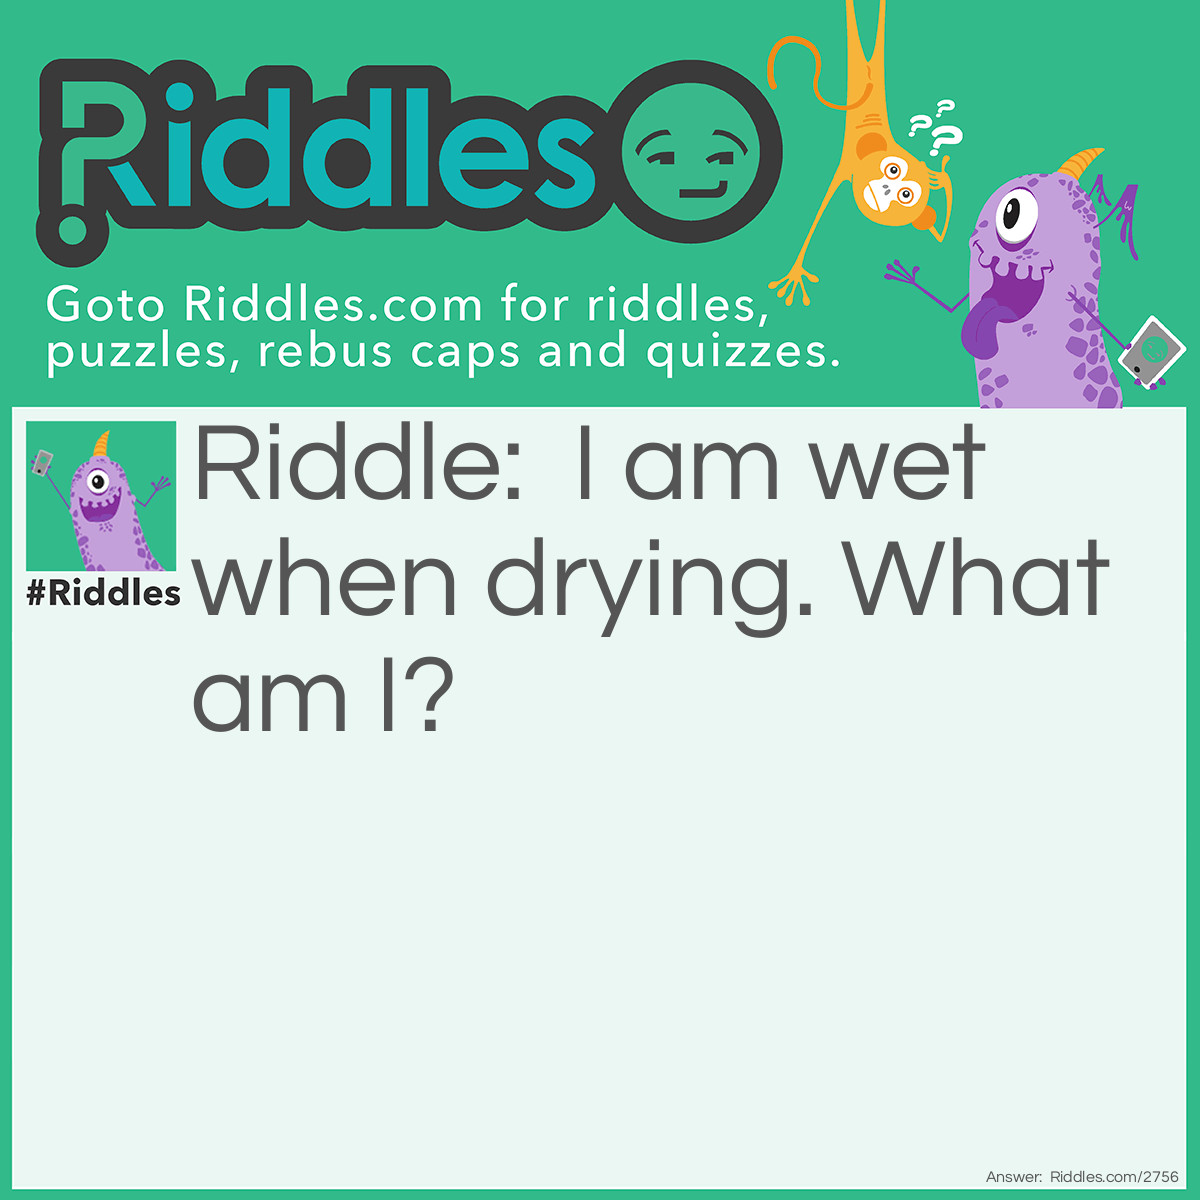 Riddle: I am wet when drying. What am I? Answer: A towel.